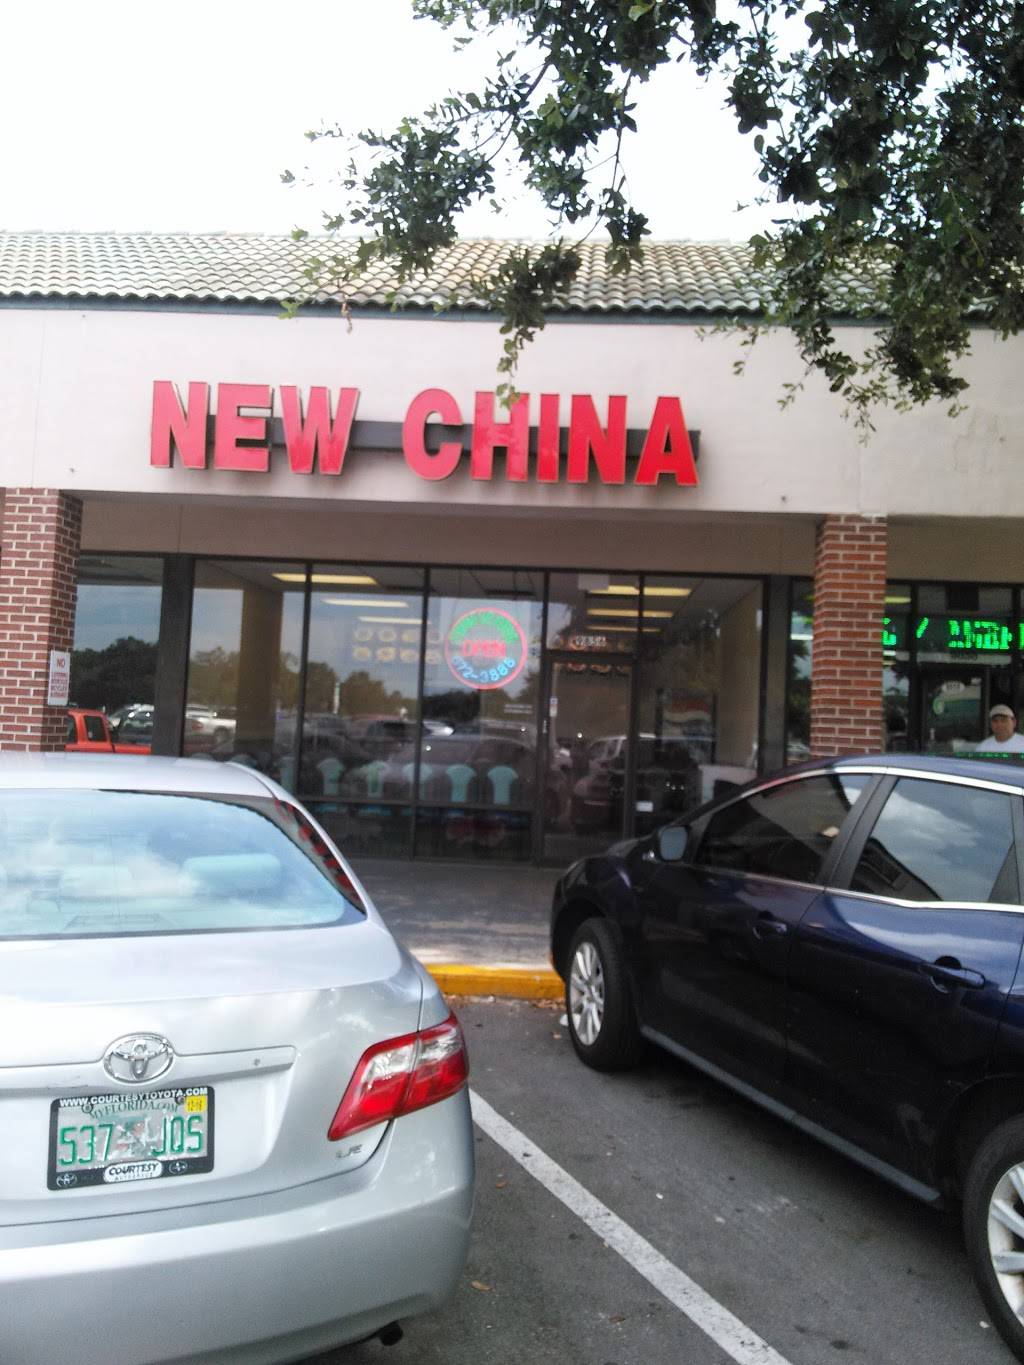 New China | restaurant | 9856 US-301 S, Riverview, FL 33578, USA | 8136723888 OR +1 813-672-3888